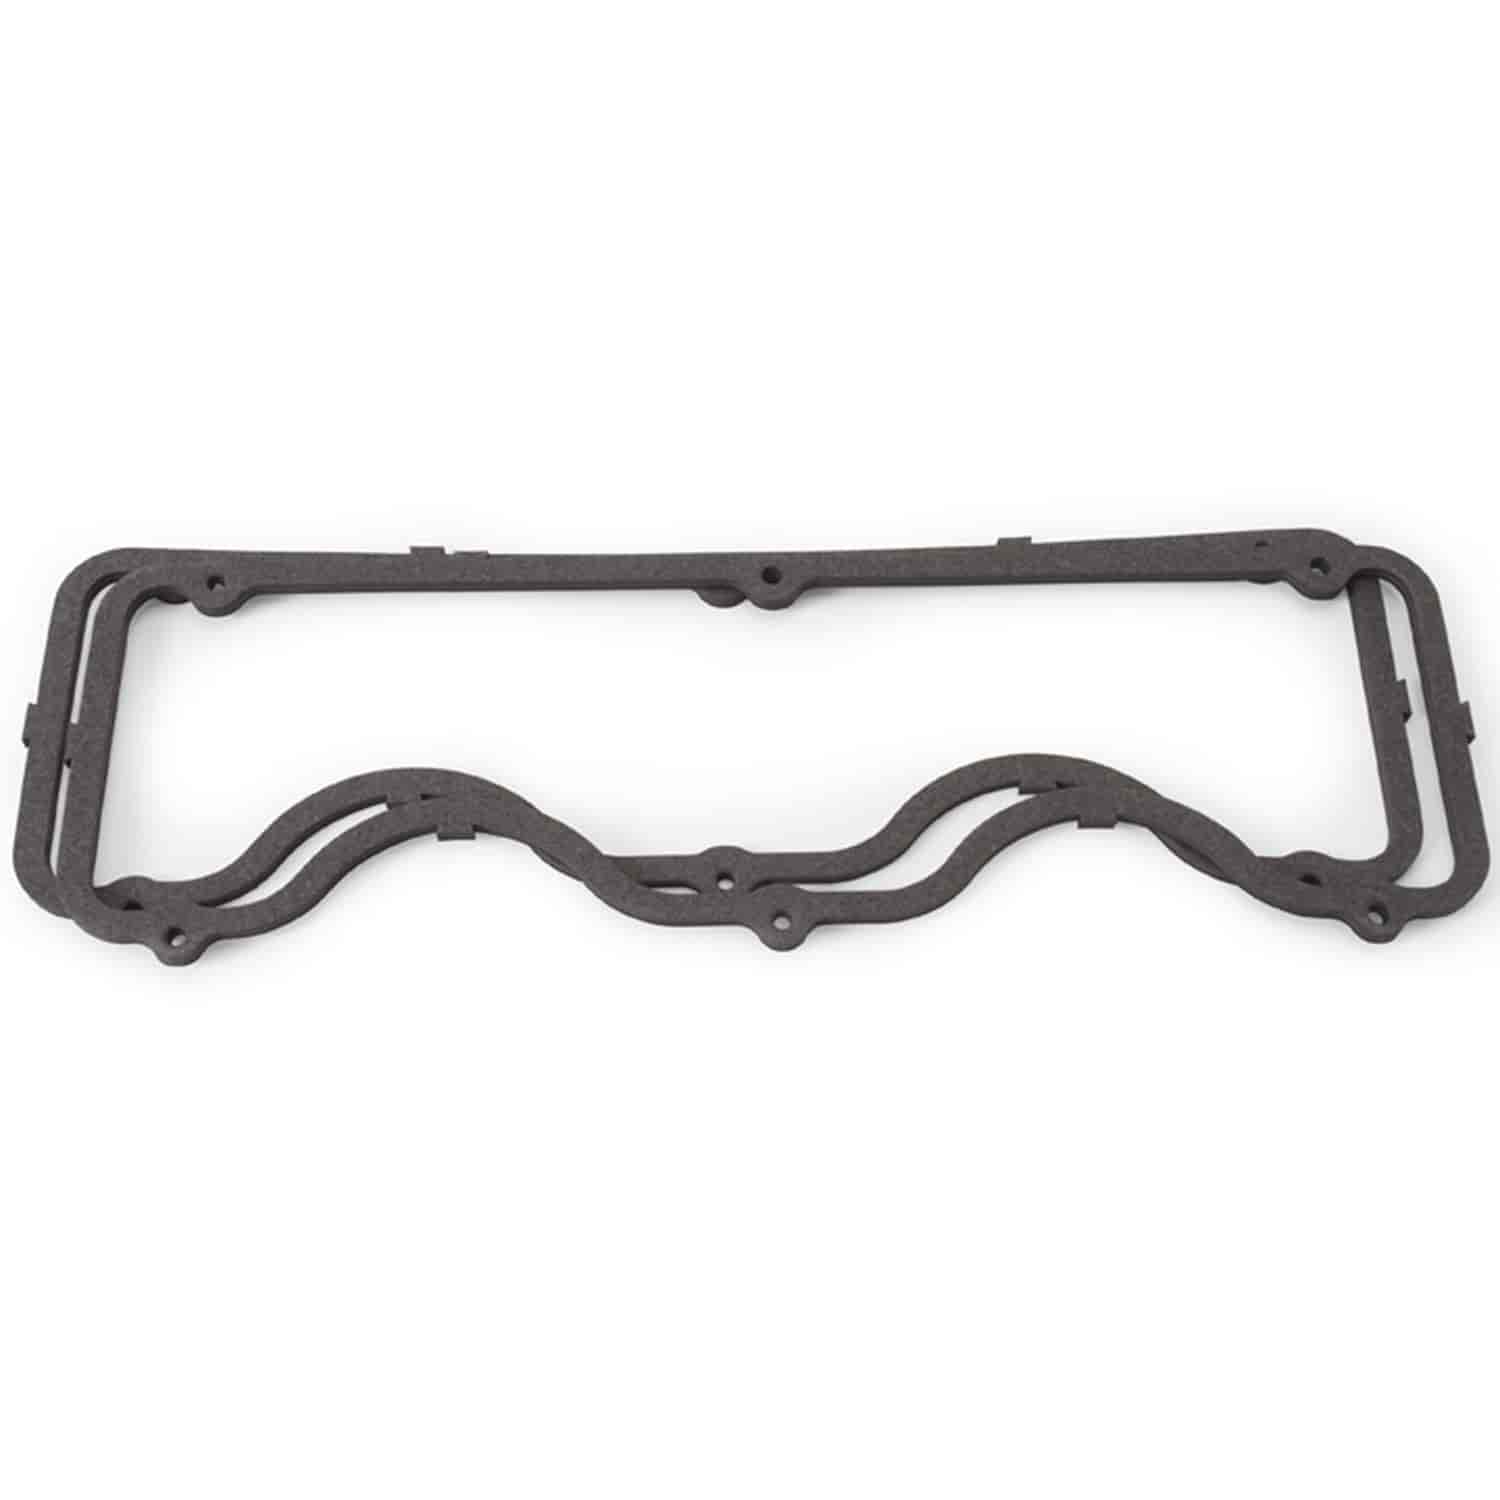 Valve Cover Gaskets for Chevy W-Series 348/409